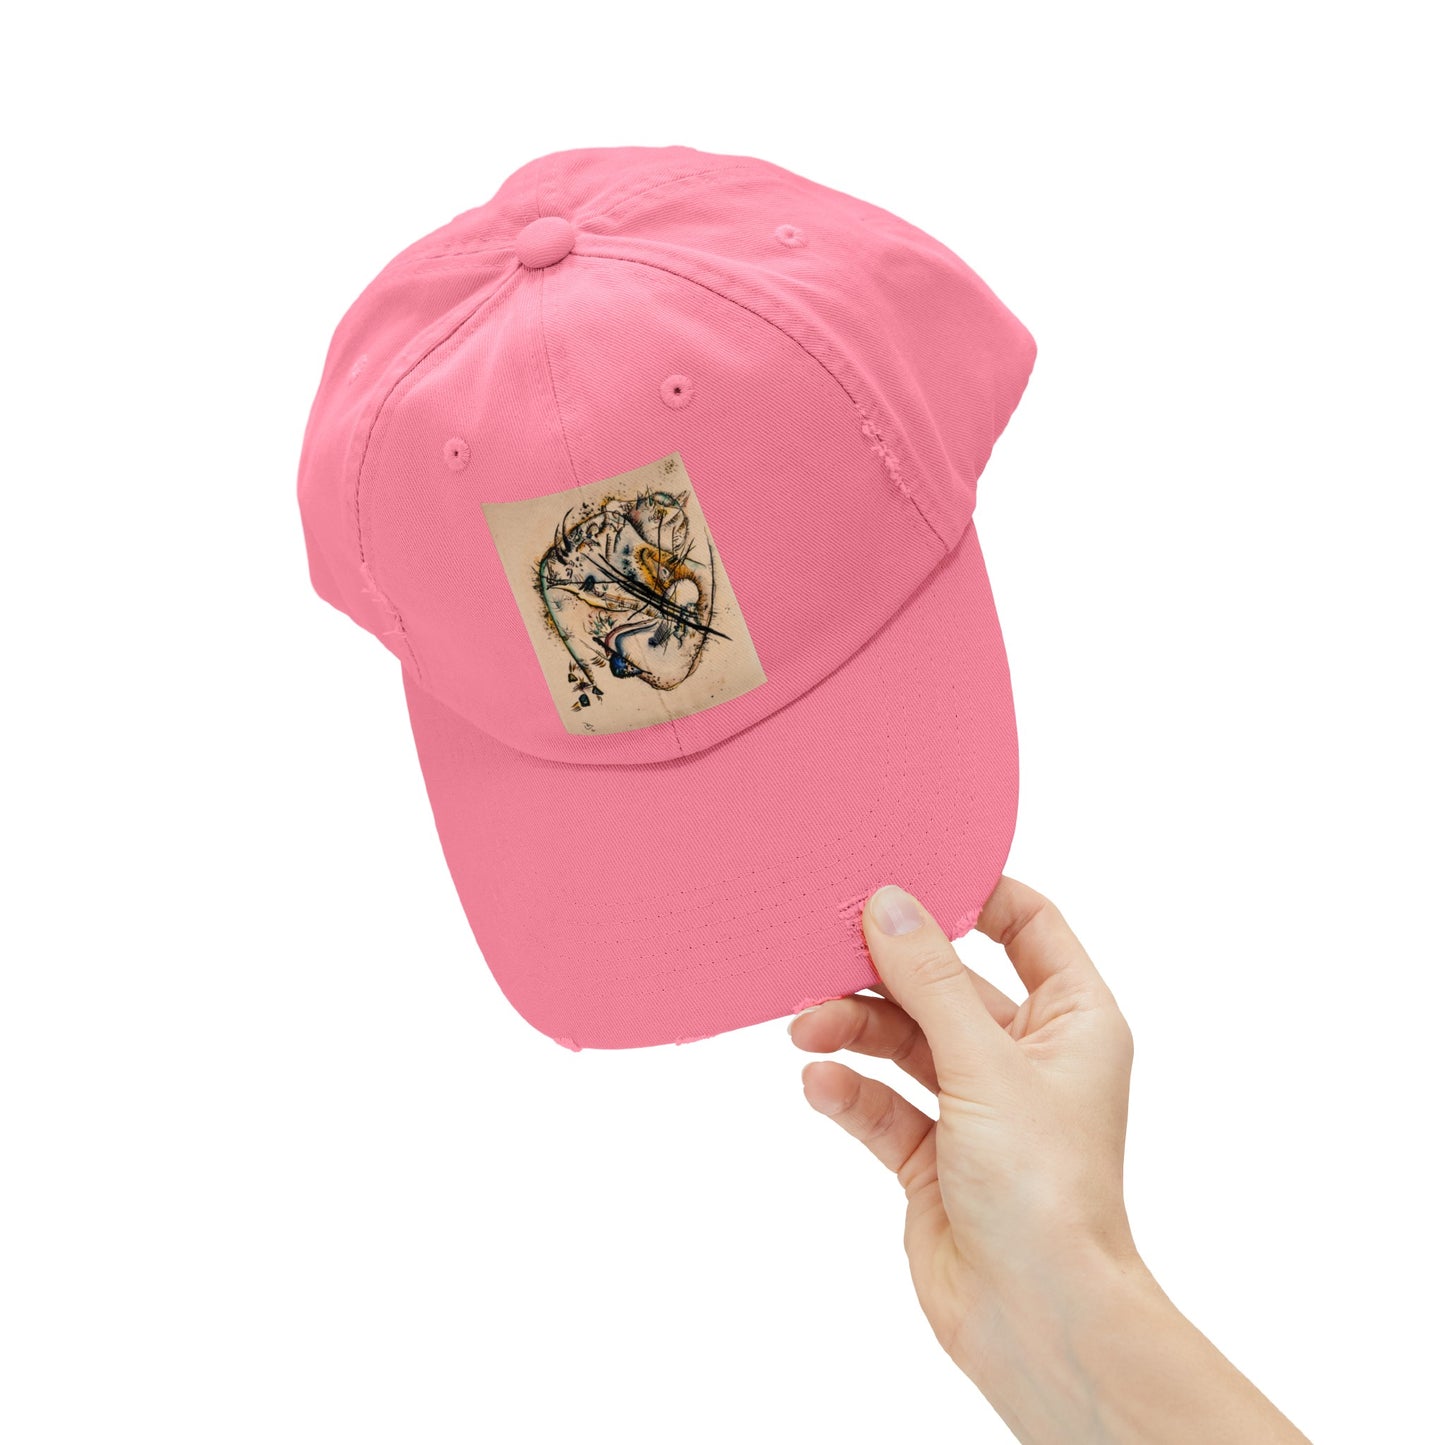 a pink hat with a picture of a horse on it